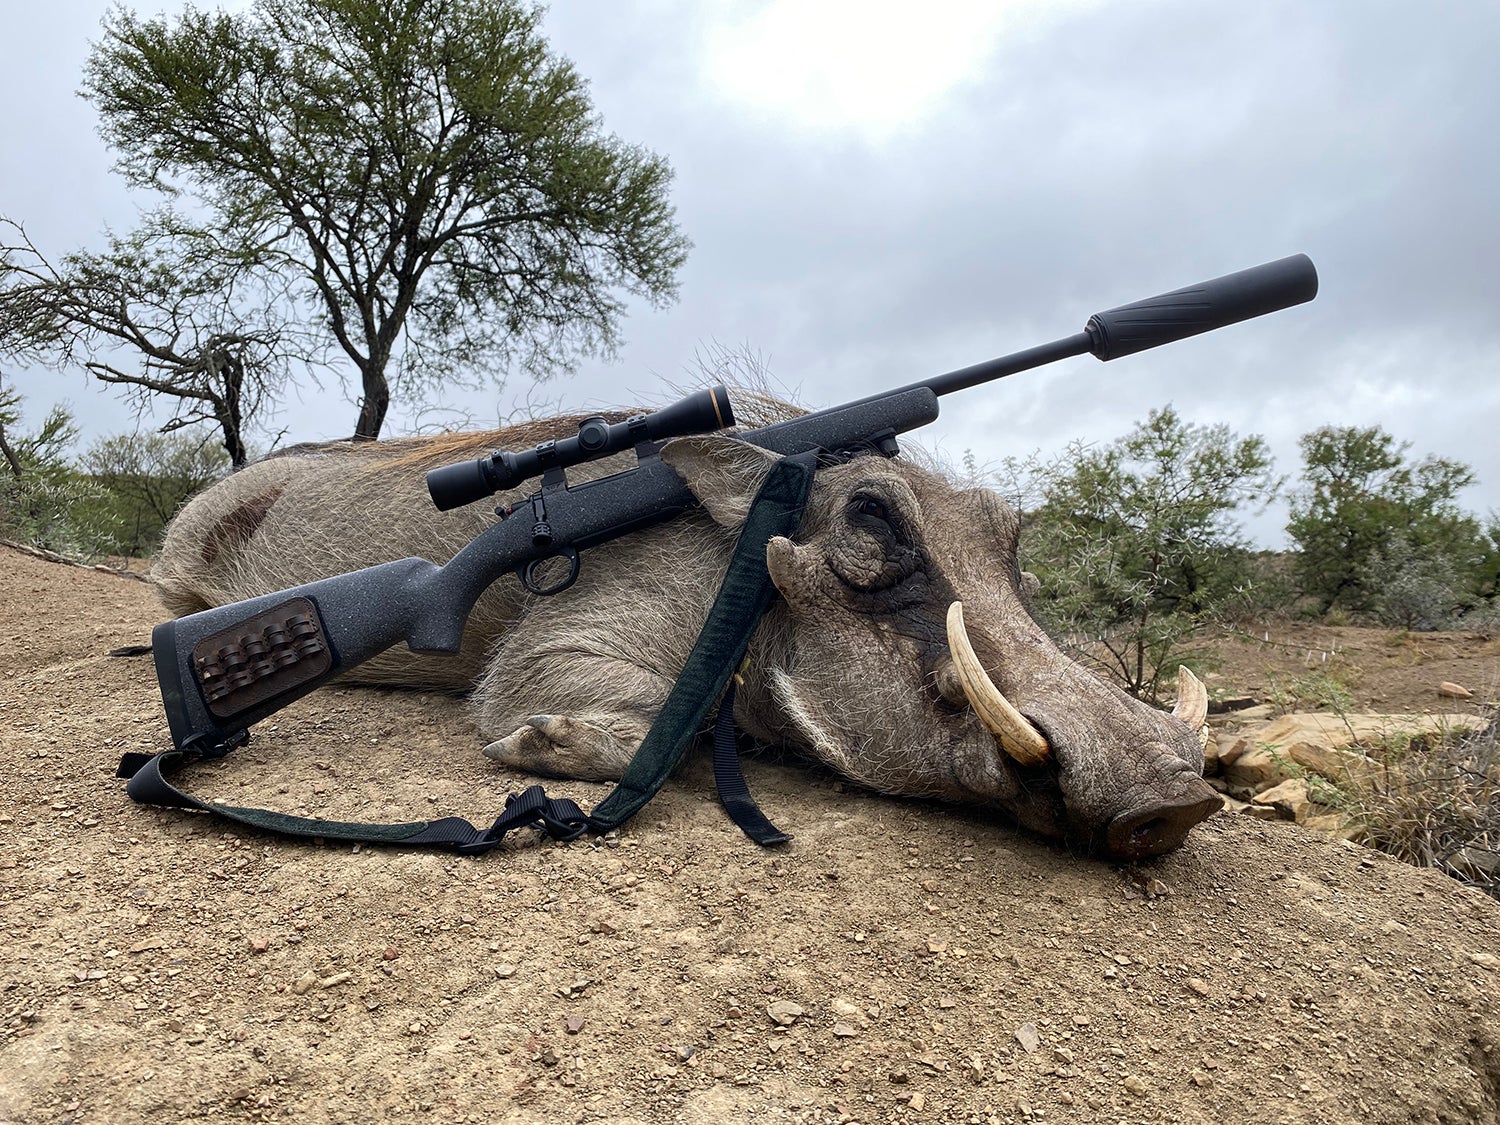 A hunter harvested warthog on a rock with a suppressed rifle laid over it.